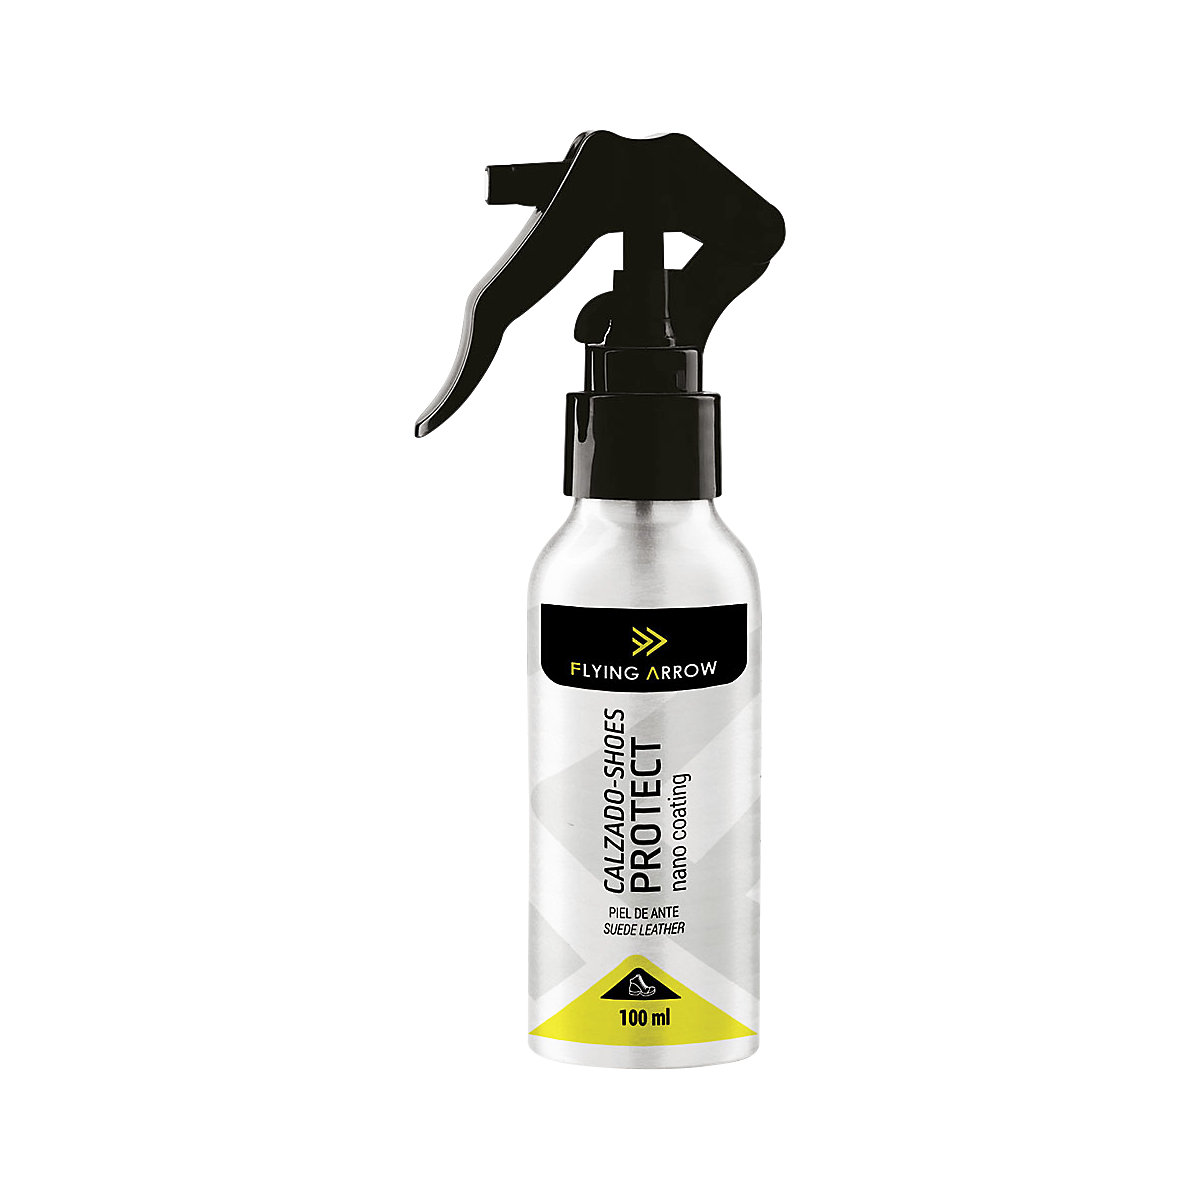 FLYING ARROW PROTECTOR shoe protection spray – DUNLOP